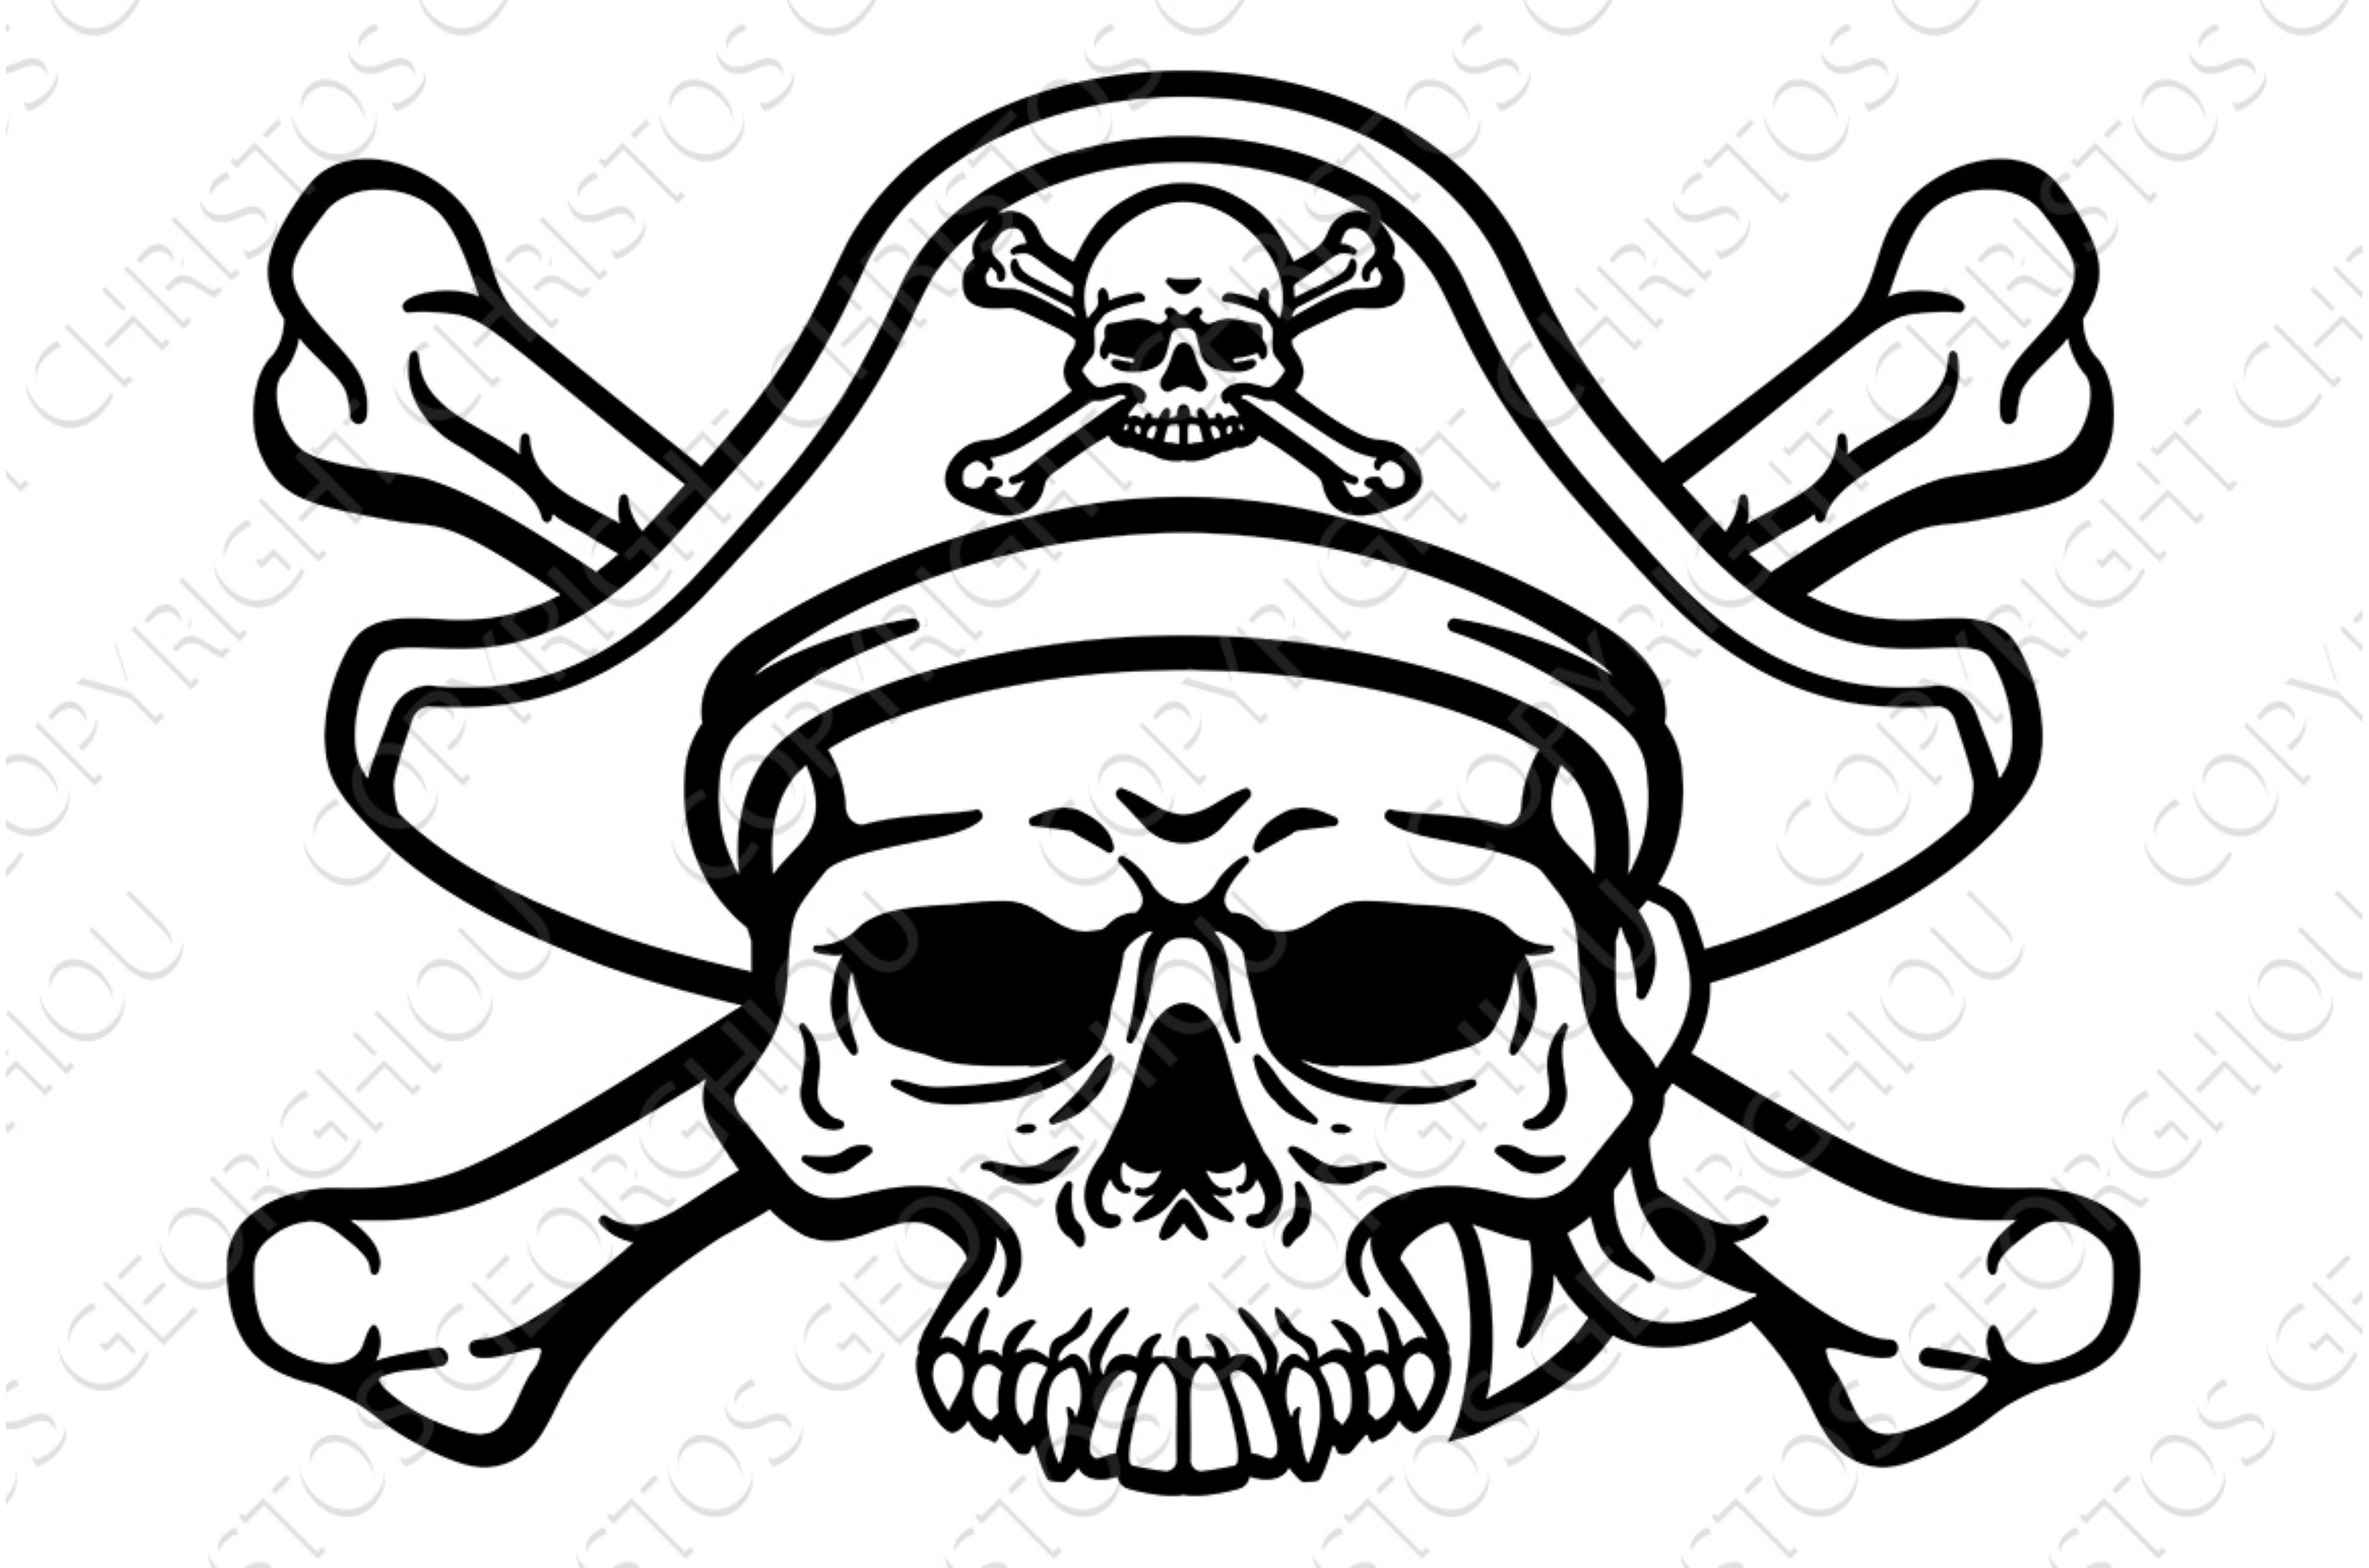 Pirate Hat Skull and Crossbones cover image.